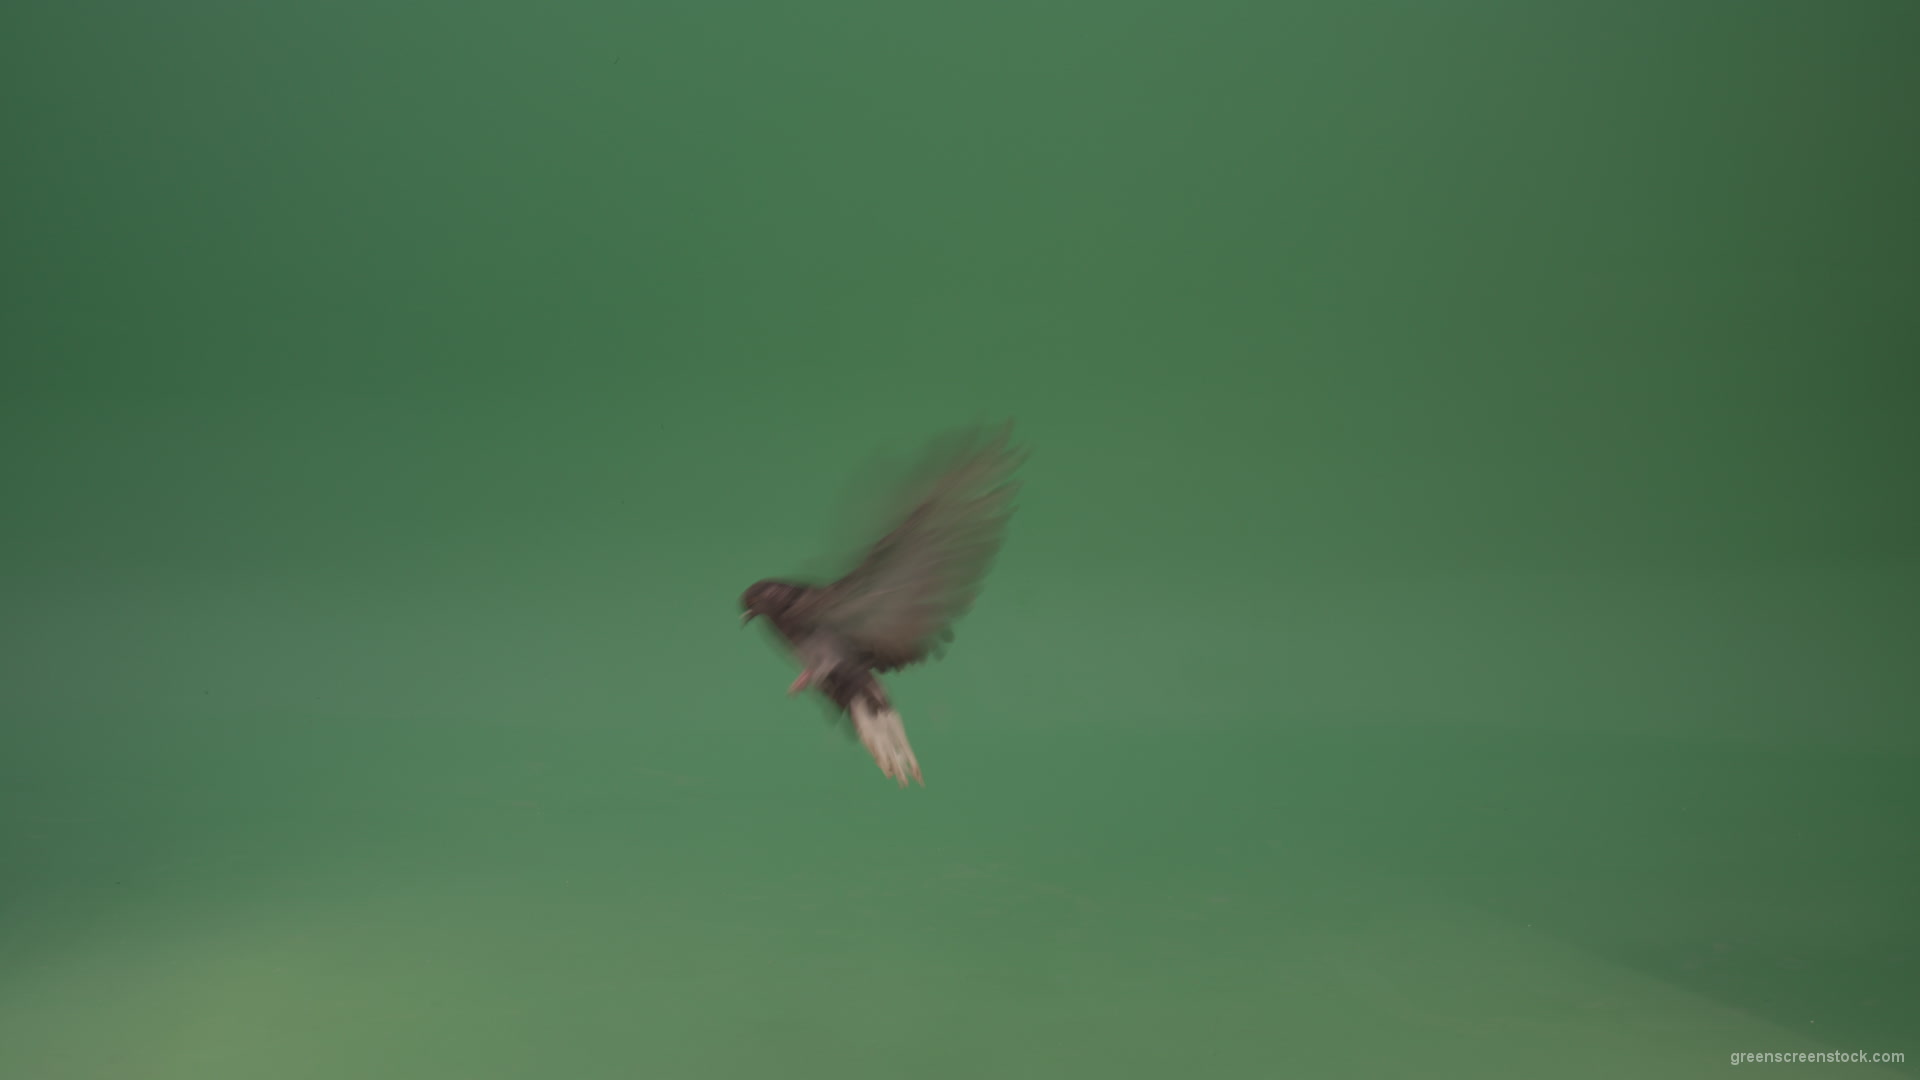 Dove-bird-flies-and-descends-to-the-ground-isolated-on-green-background_006 Green Screen Stock